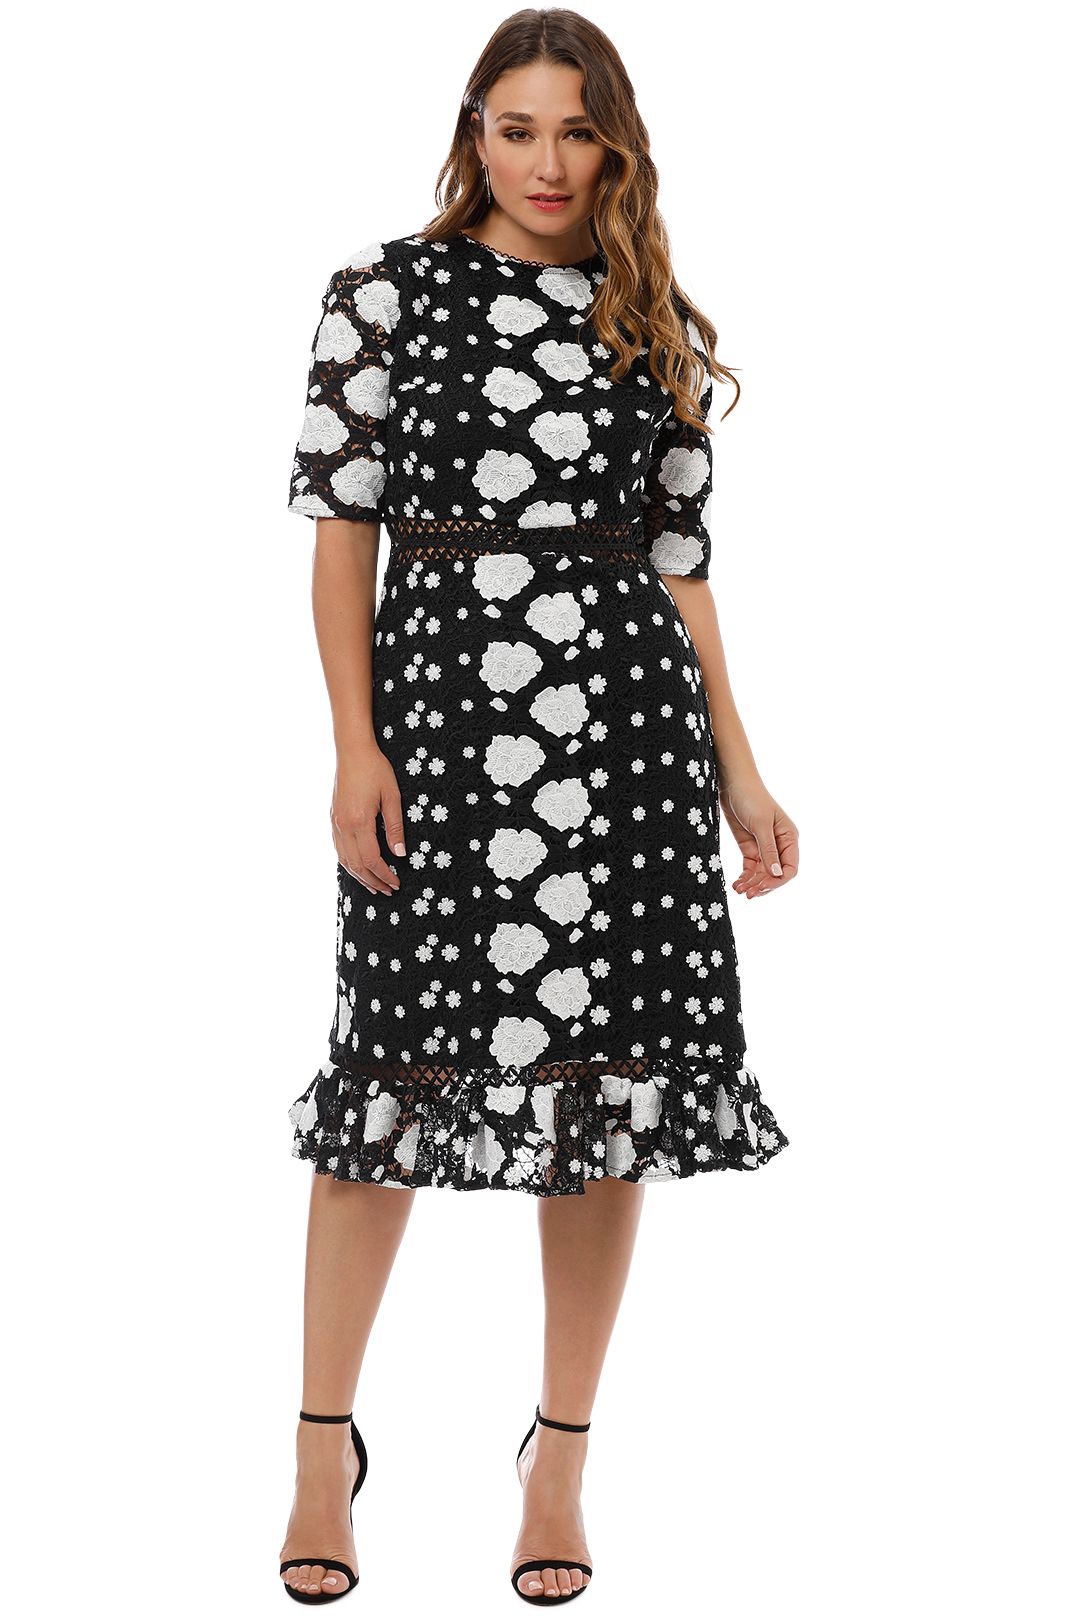 Ministry of Style - Wildflower Midi Dress - Black White - Front